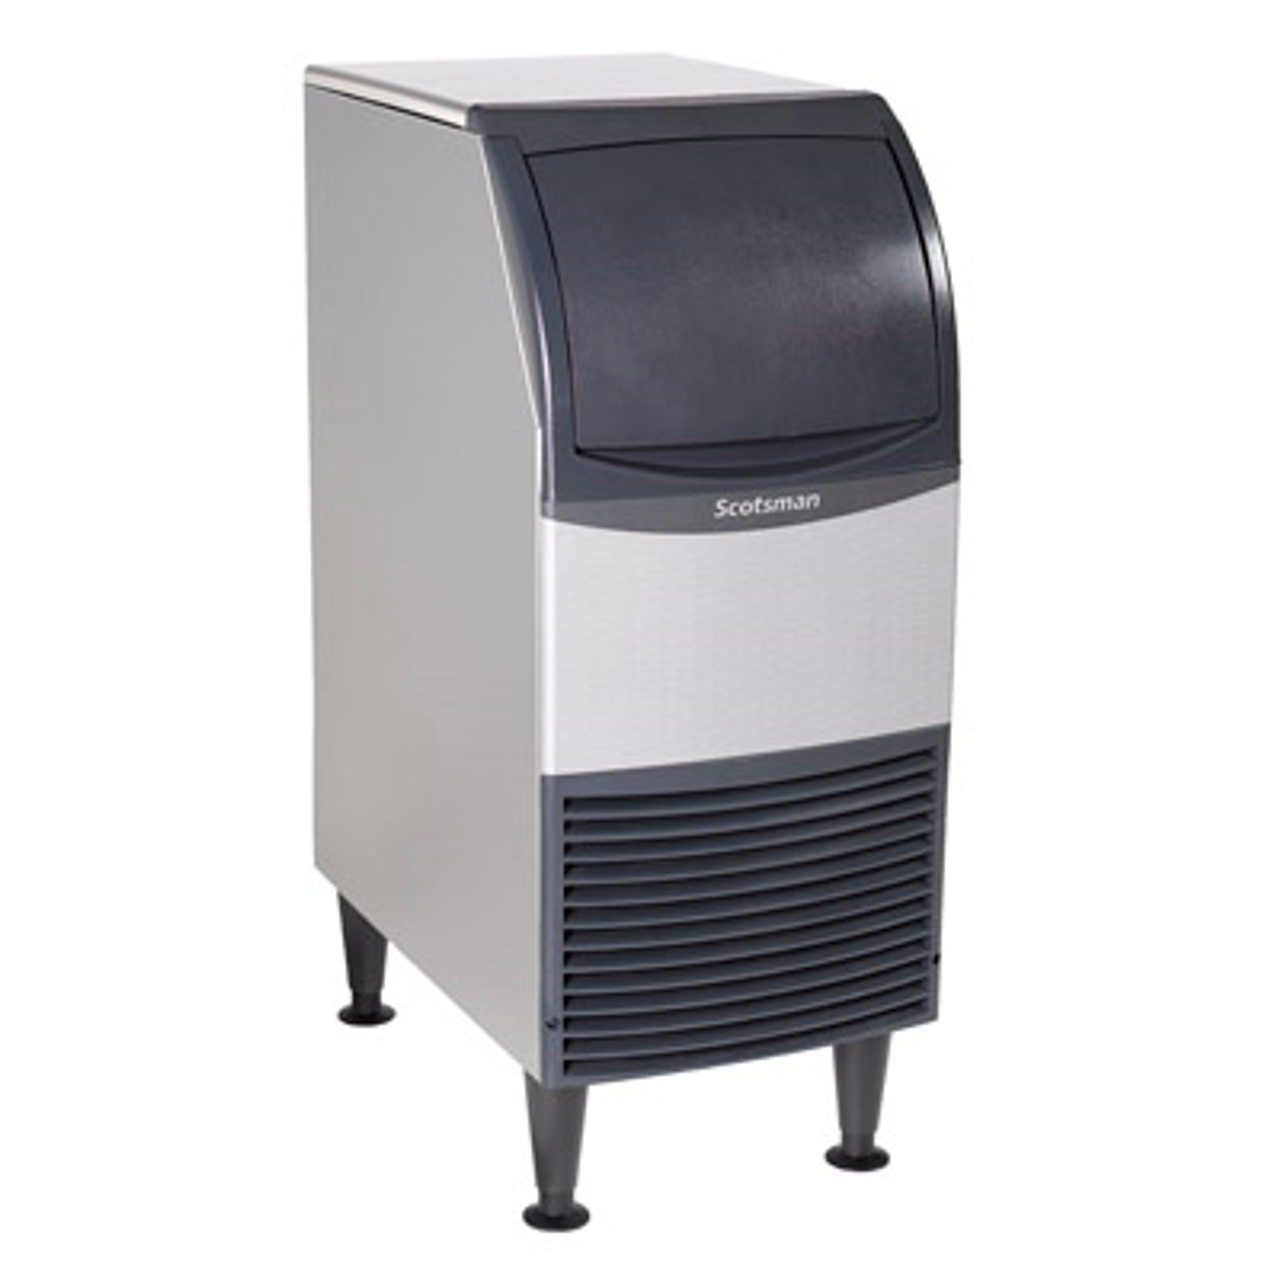 Undercounter Ice Maker With Bin, cube style, air cooled, 15" width, self contained condenser, production capacity up to 58 lb/24 hours at 70°/50° (38 lb certified at 90°/70°), 36 lb bin storage capacity, clear medium cube, horizontal evaporator, ADA compliant with floor mount kit, no side clearance required, unit specific QR code, 6" legs included, ice scoop included, R-134a refrigerant, includes power cord with NEMA 5-15P plug, 115V/60/1-ph, 3.6 amps, cETLus, ETL-Sanitation, CE, engineered and assembled in USA